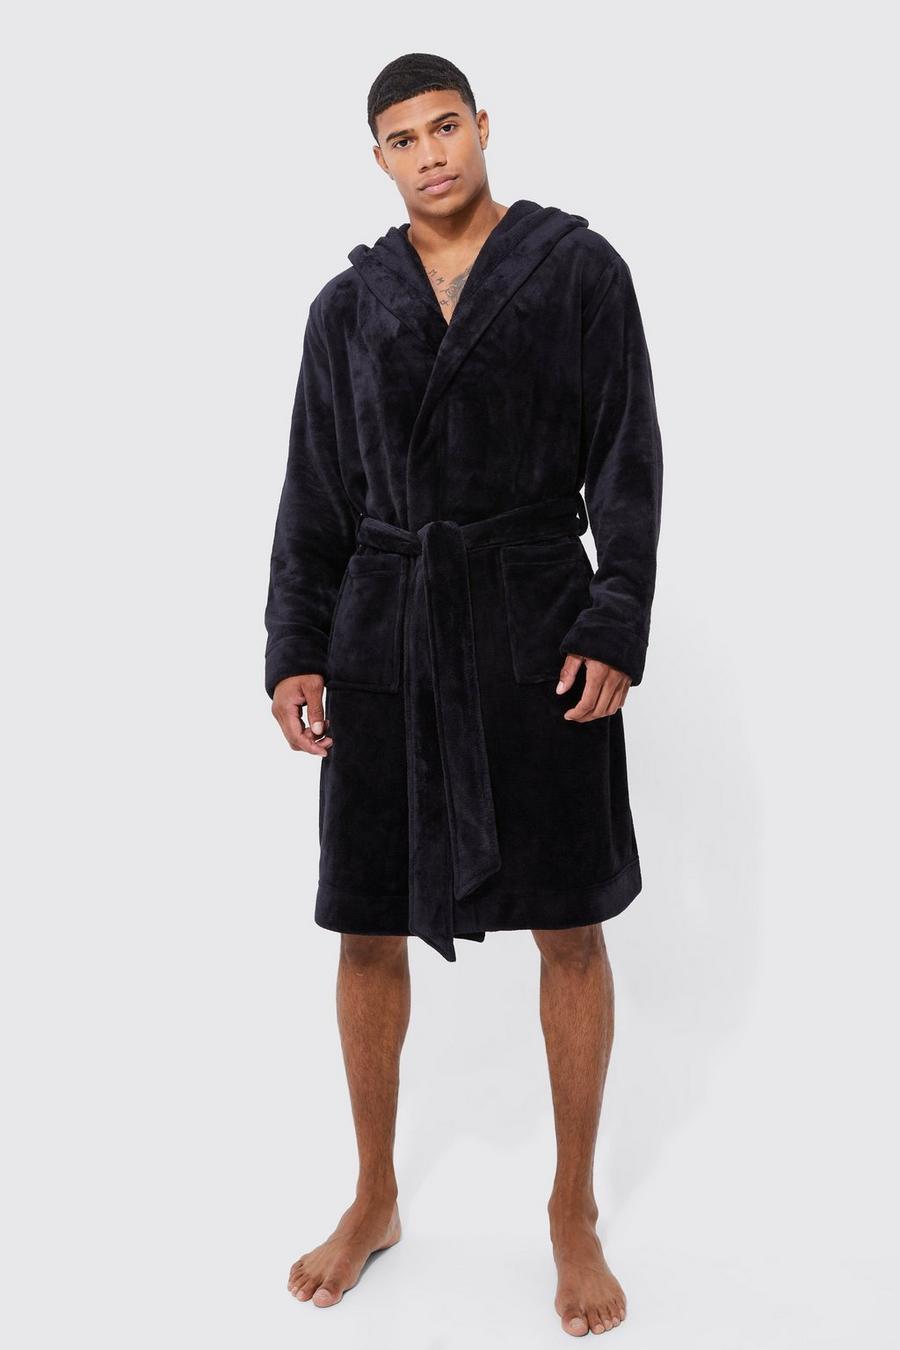 Black Hooded Dressing Gown